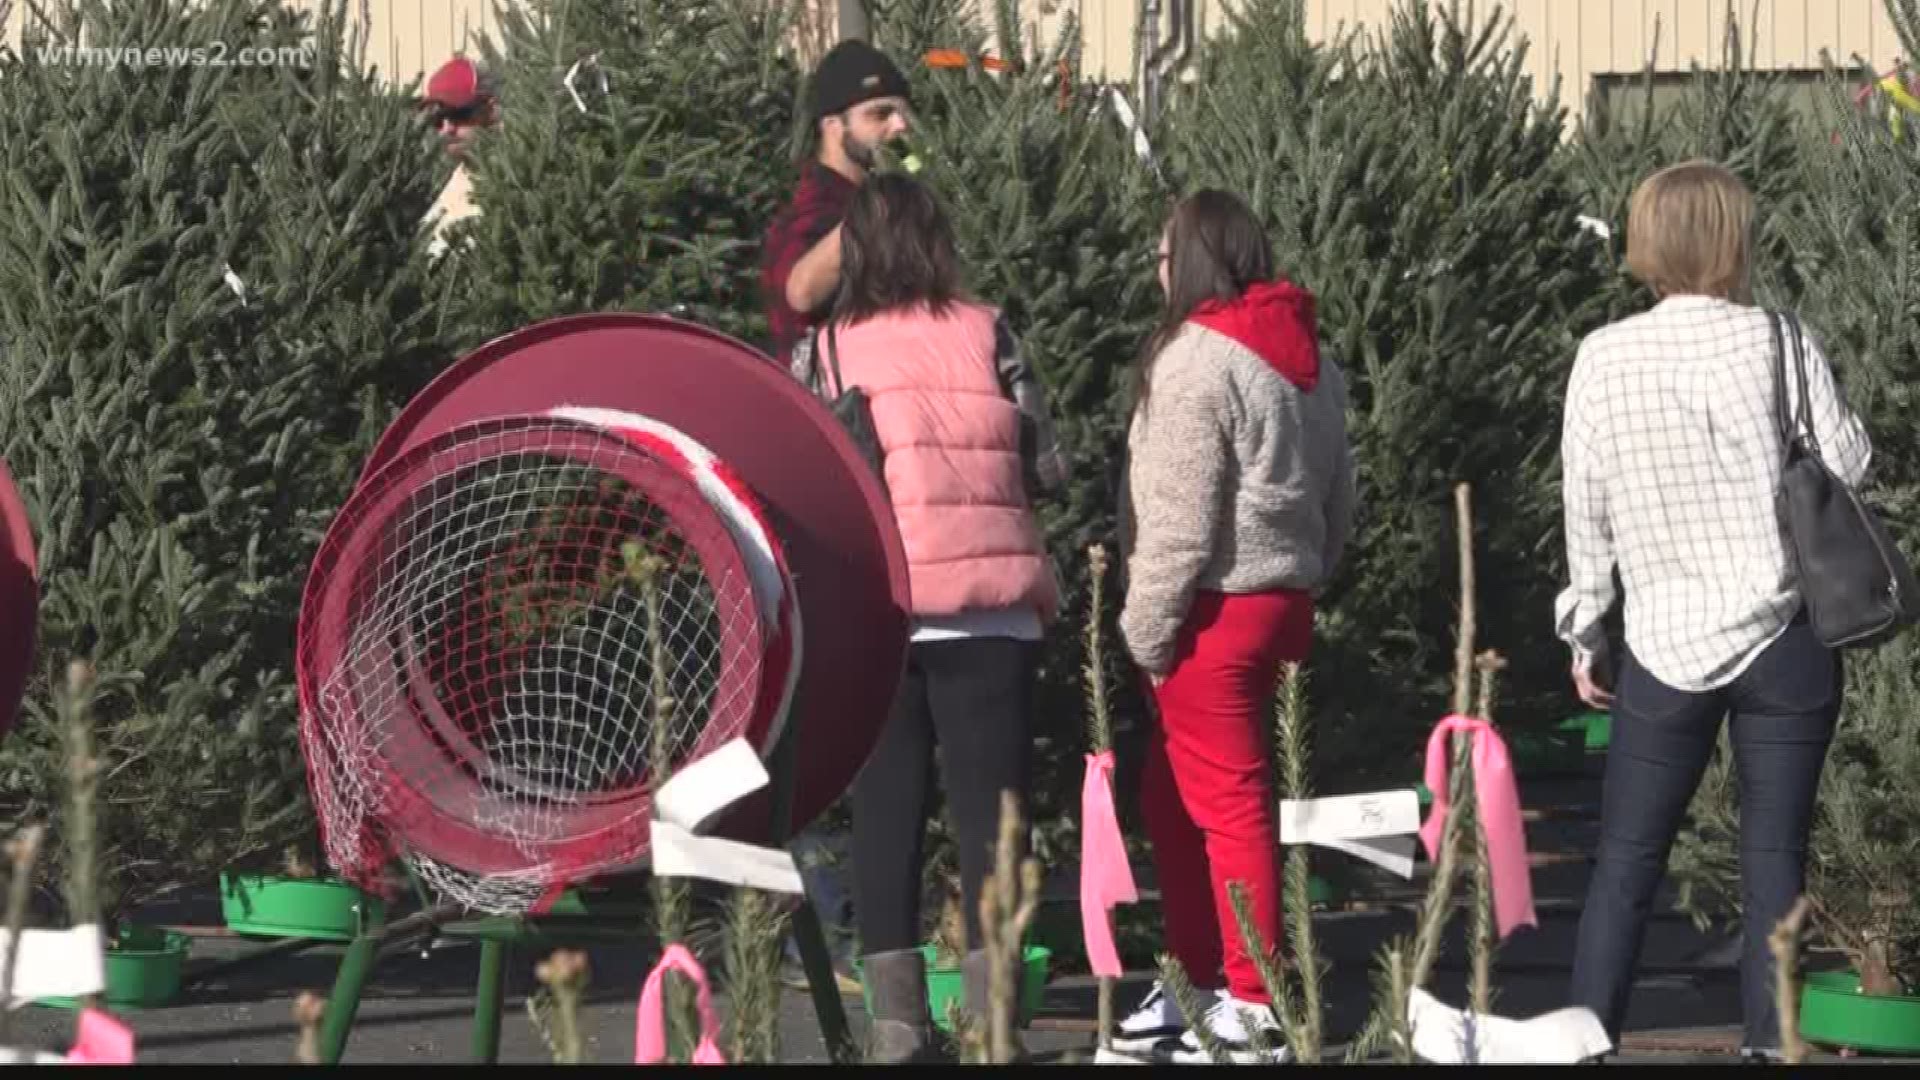 Plenty of families shop for Christmas trees the day after Thanksgiving, but a national shortage may make it harder to find the perfect one this year.